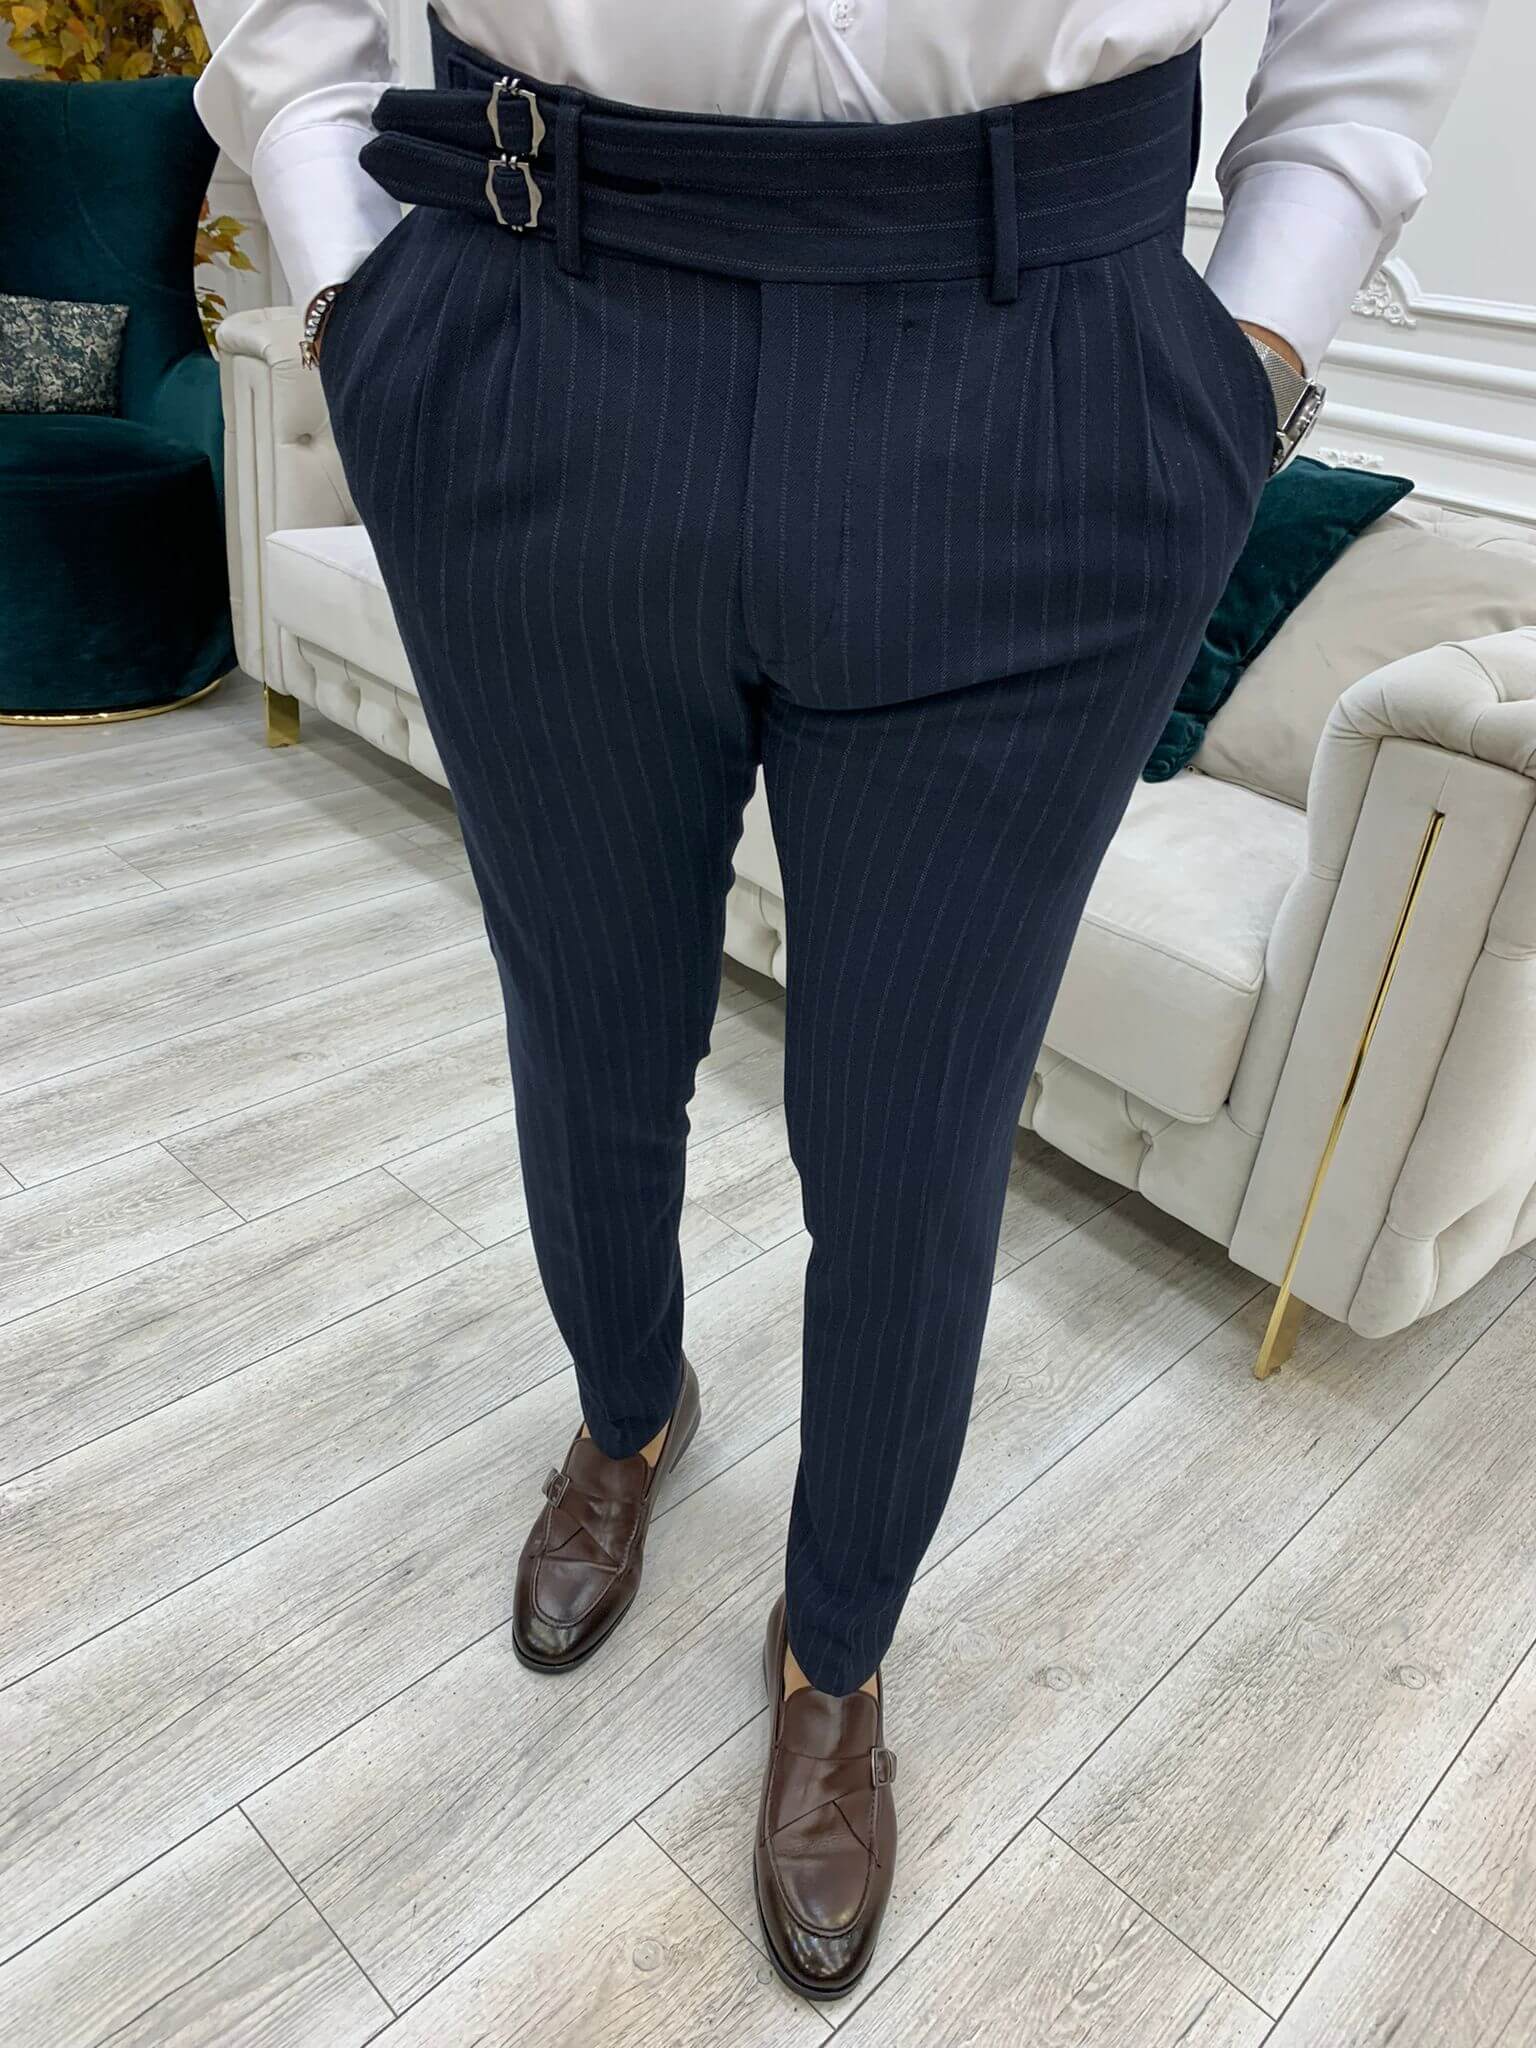 Navy blue striped pants with a stylish buckle detail